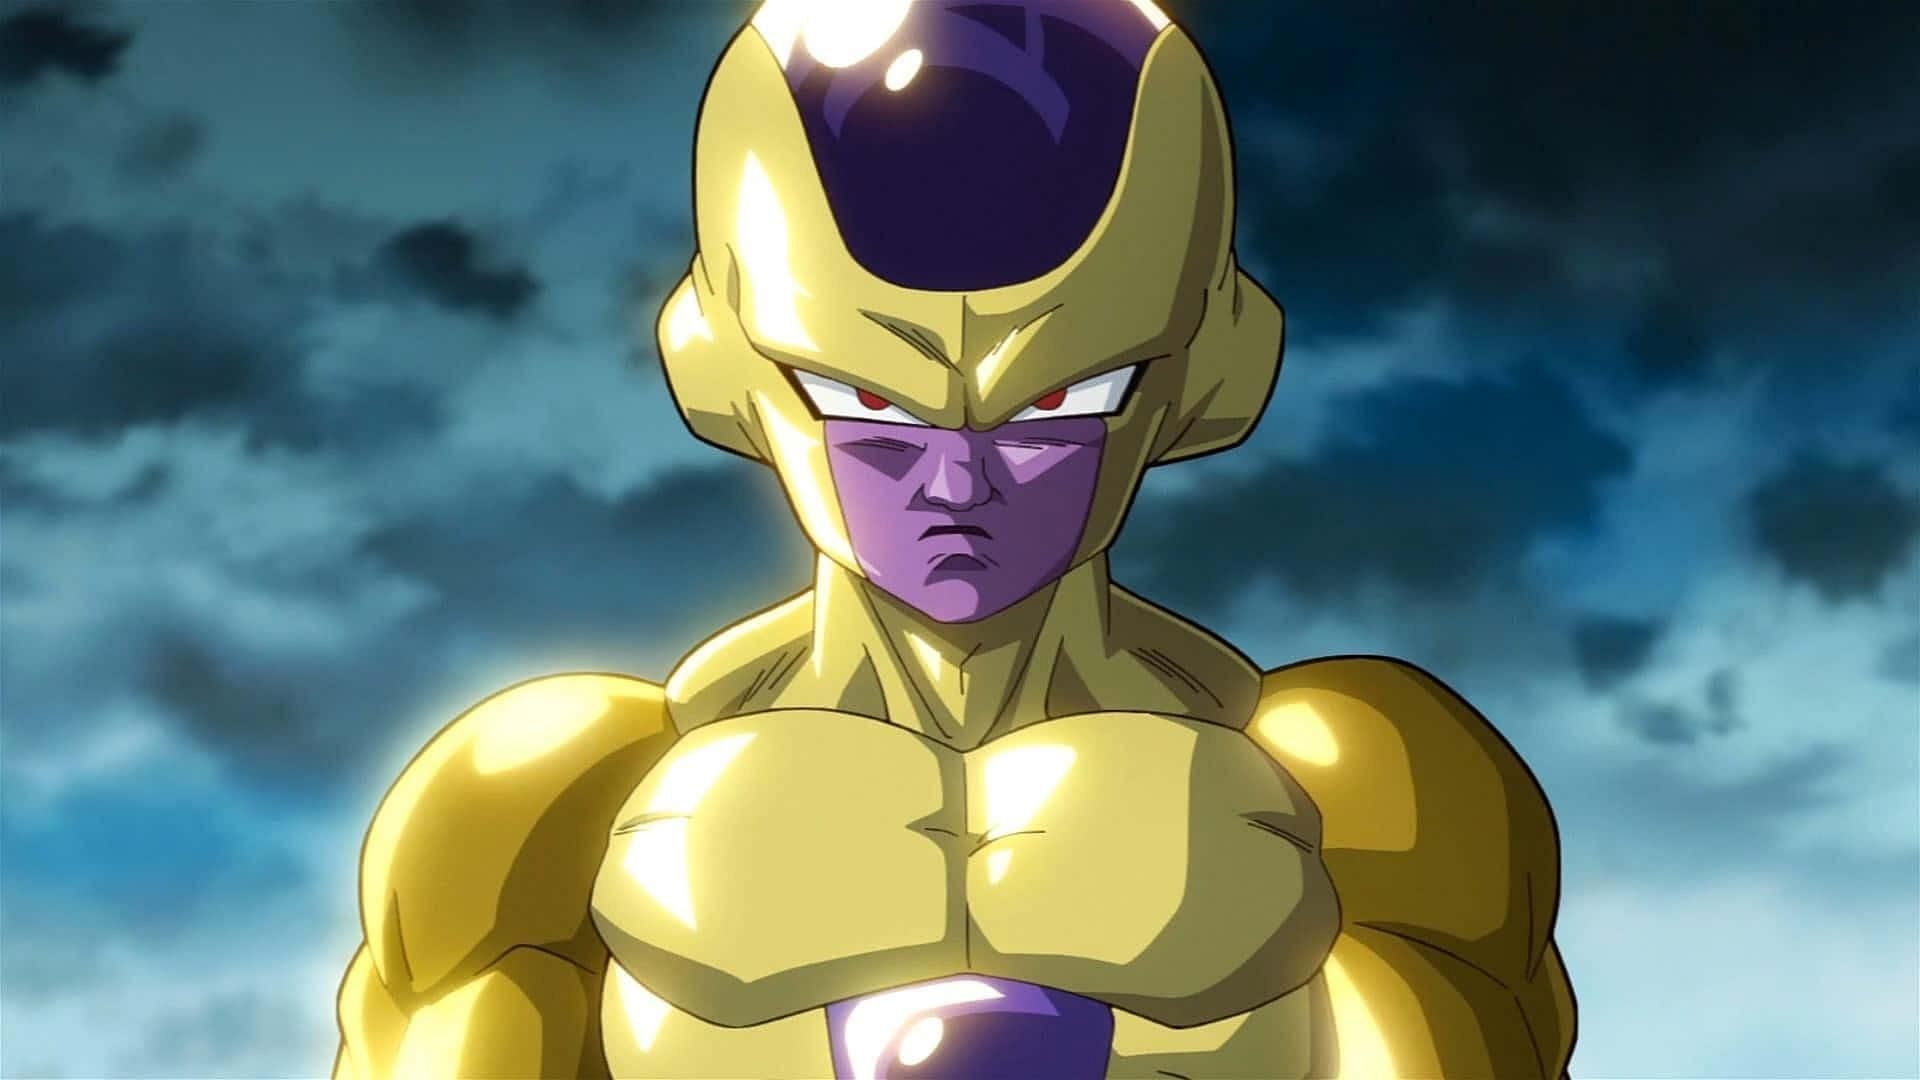 Dragon Ball has always hinted Frieza could surpass Beerus, but fans never noticed (Image via Toei Animation)